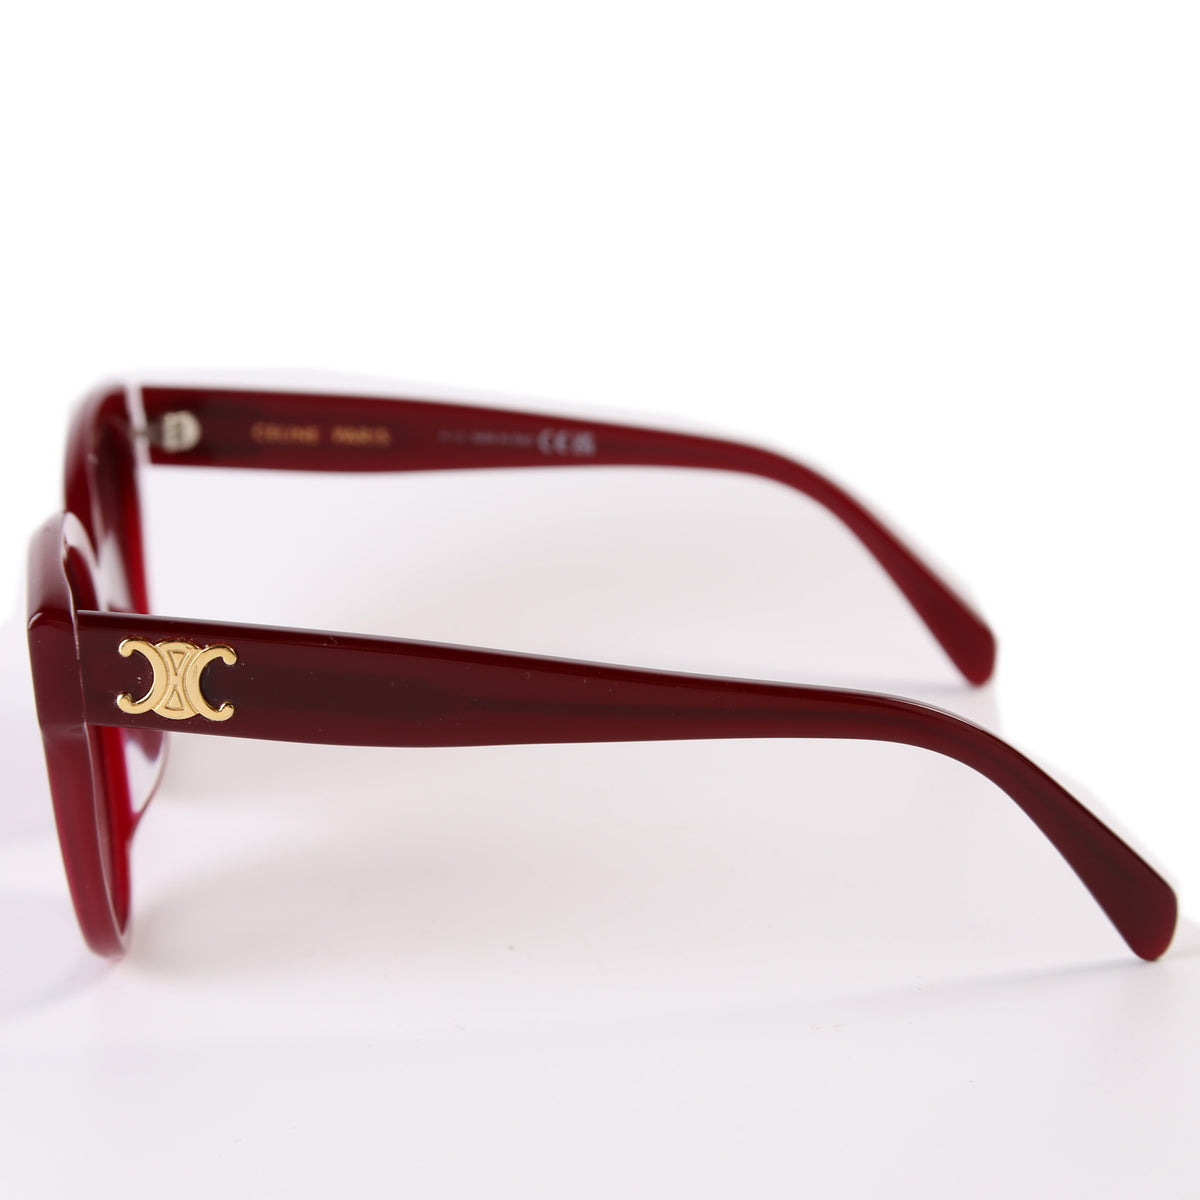 Celine - Authenticated Sunglasses - Plastic Burgundy Plain for Women, Never Worn, with Tag